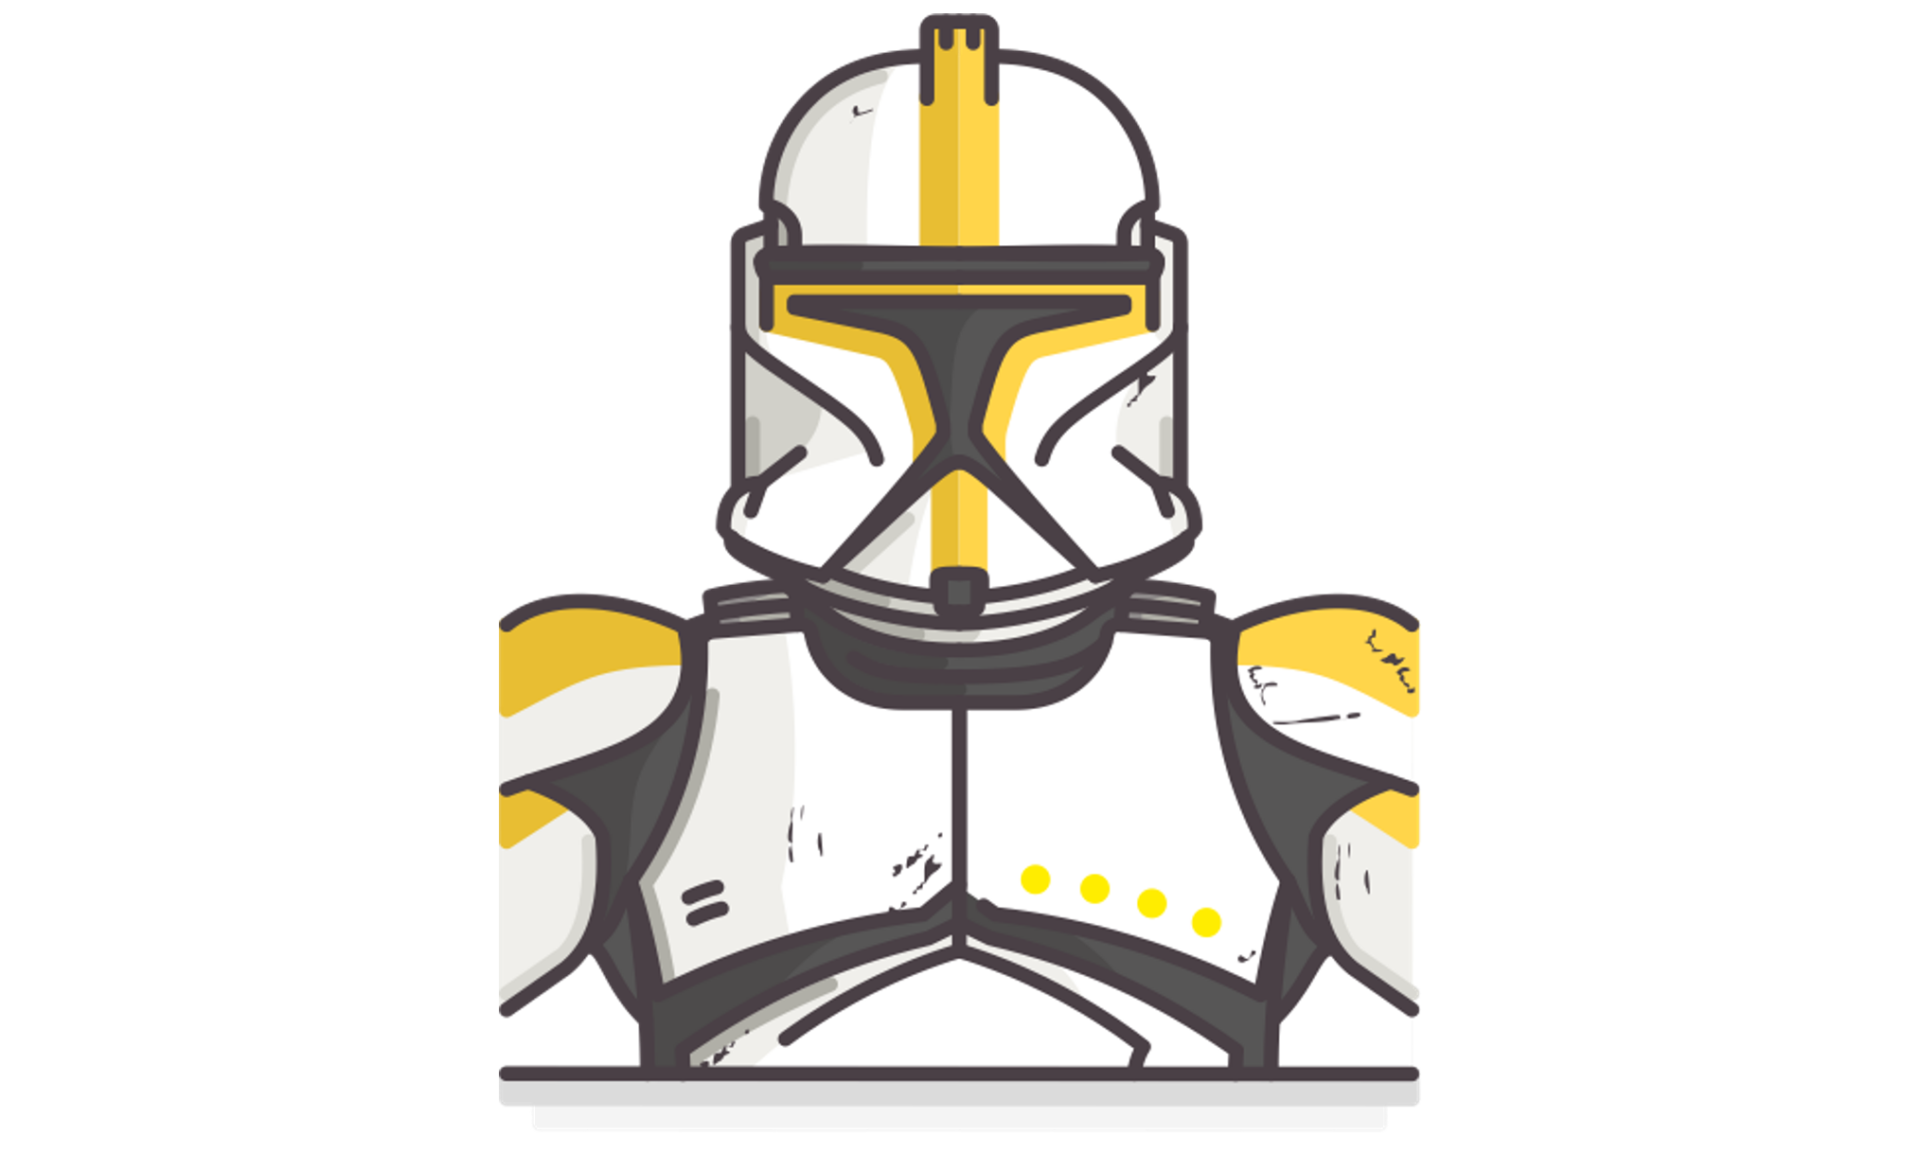 Icon of a Clone Trooper from the Star Wars prequel trilogy